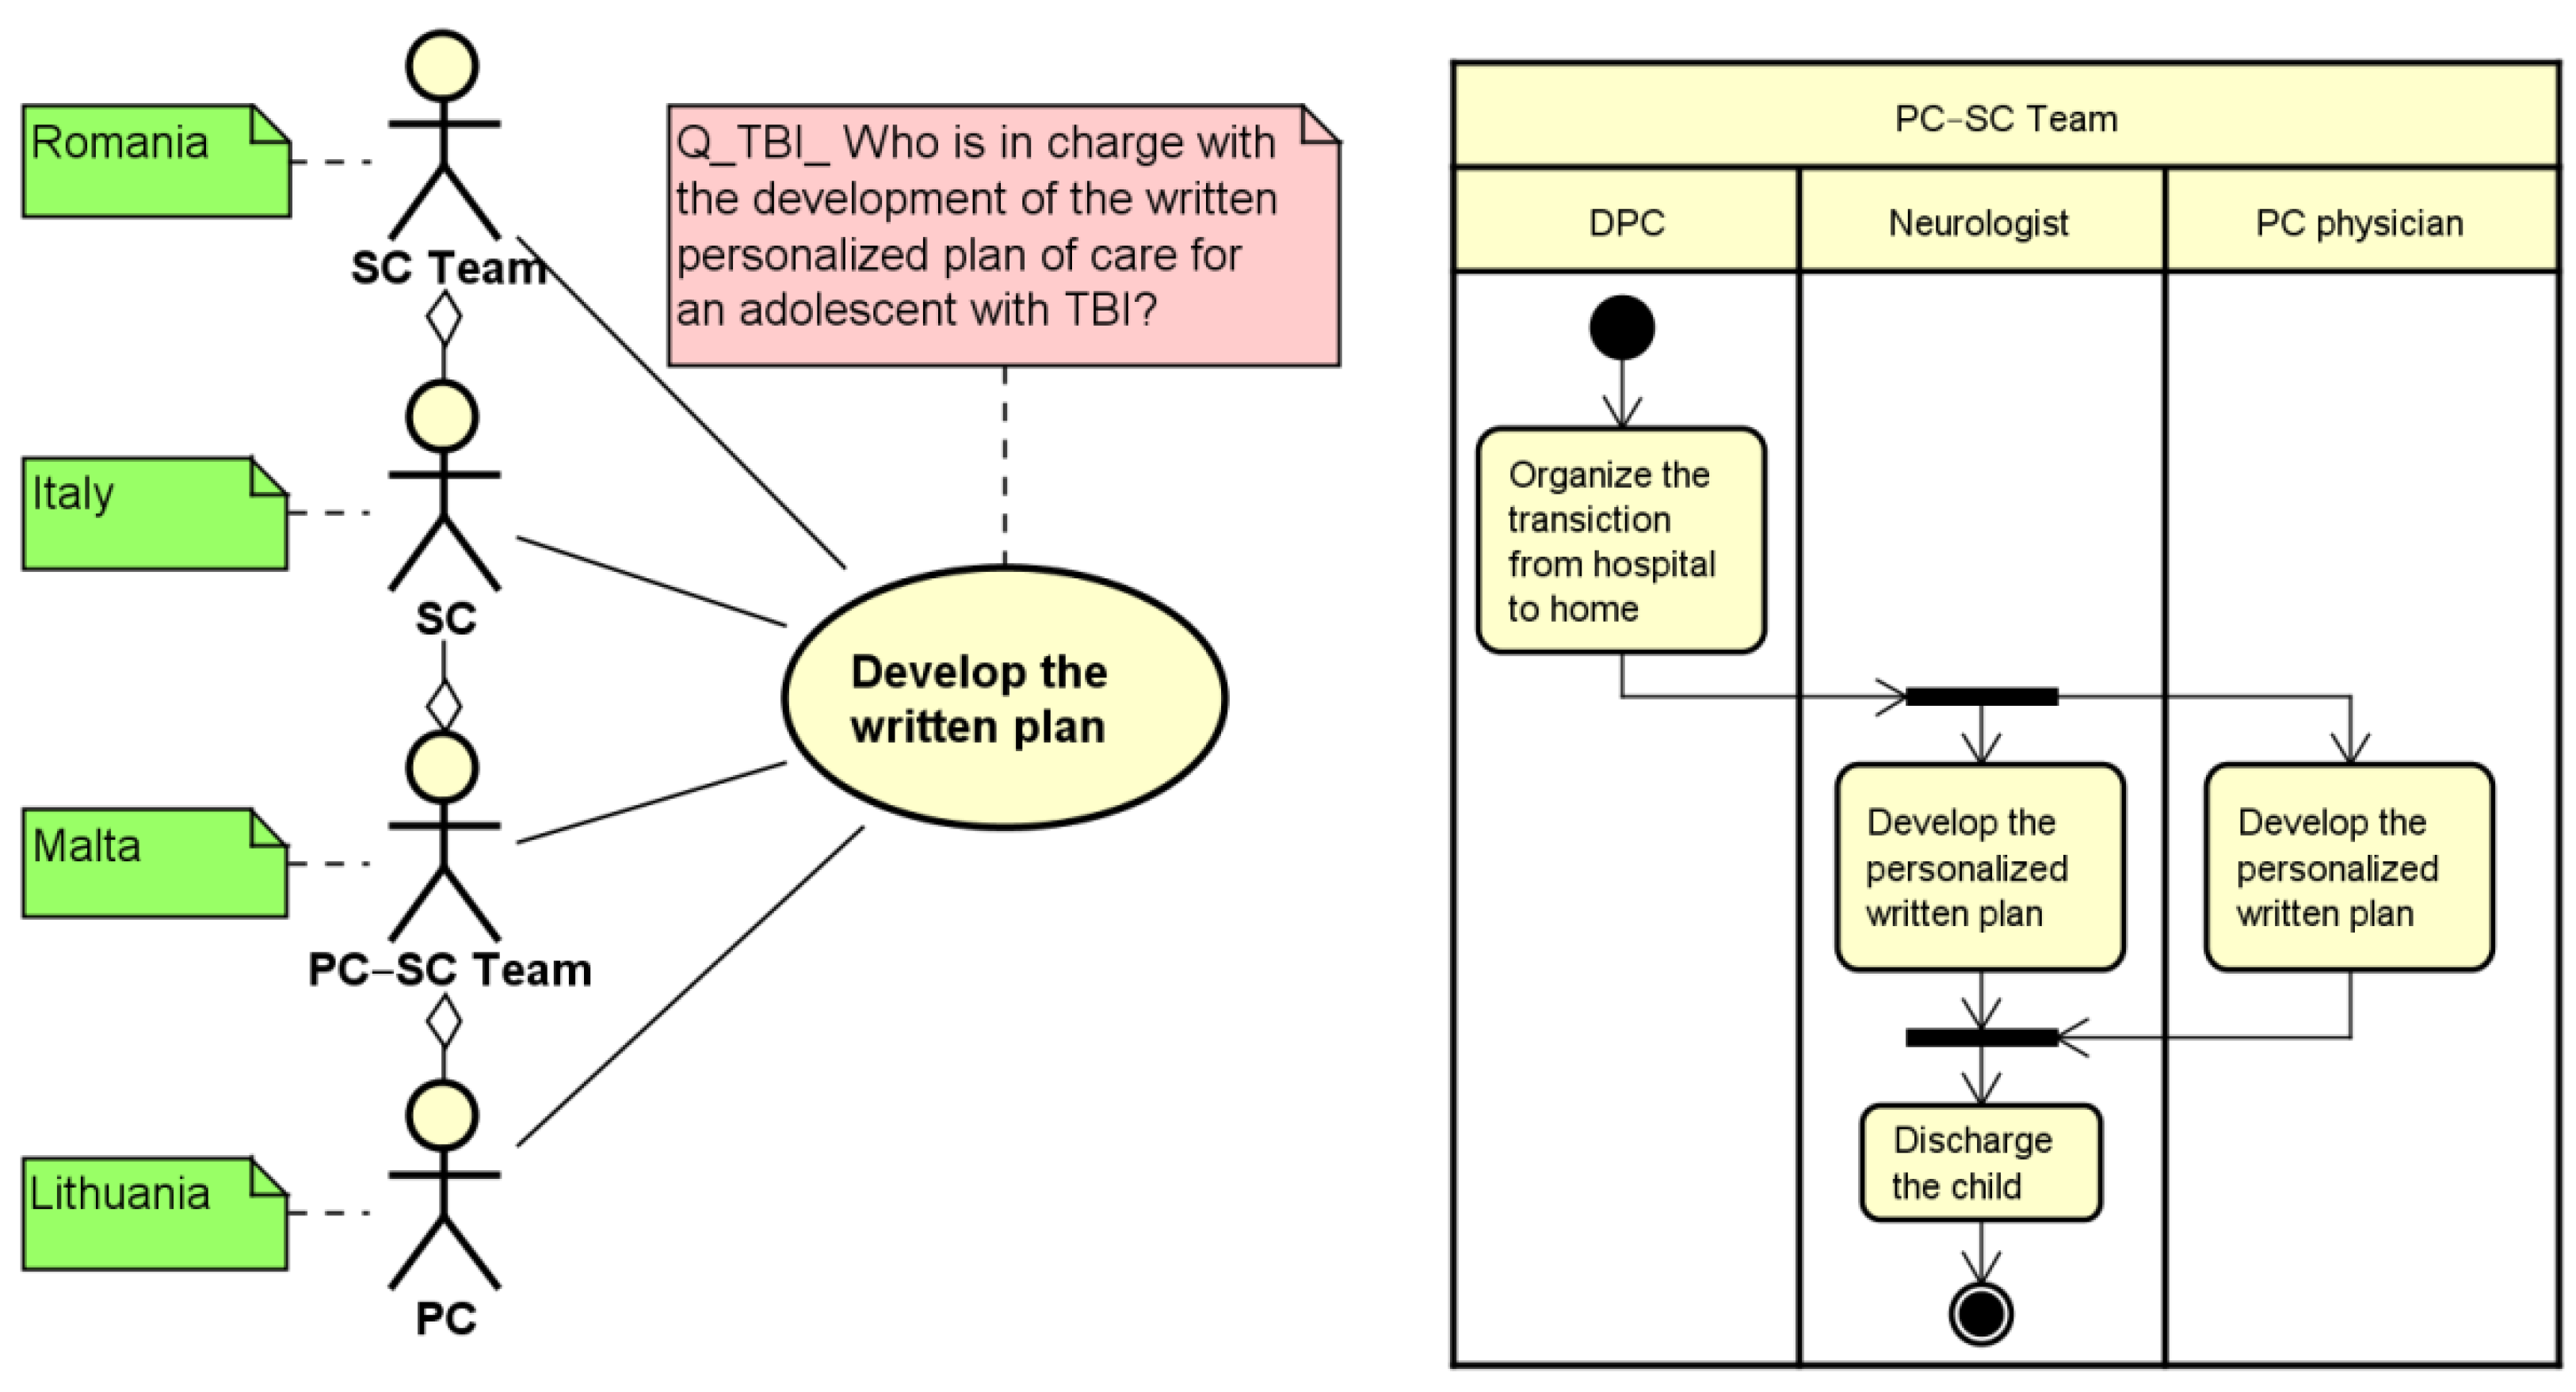 Use Case Diagram for Goal 2 from SK Telecom's Web Site